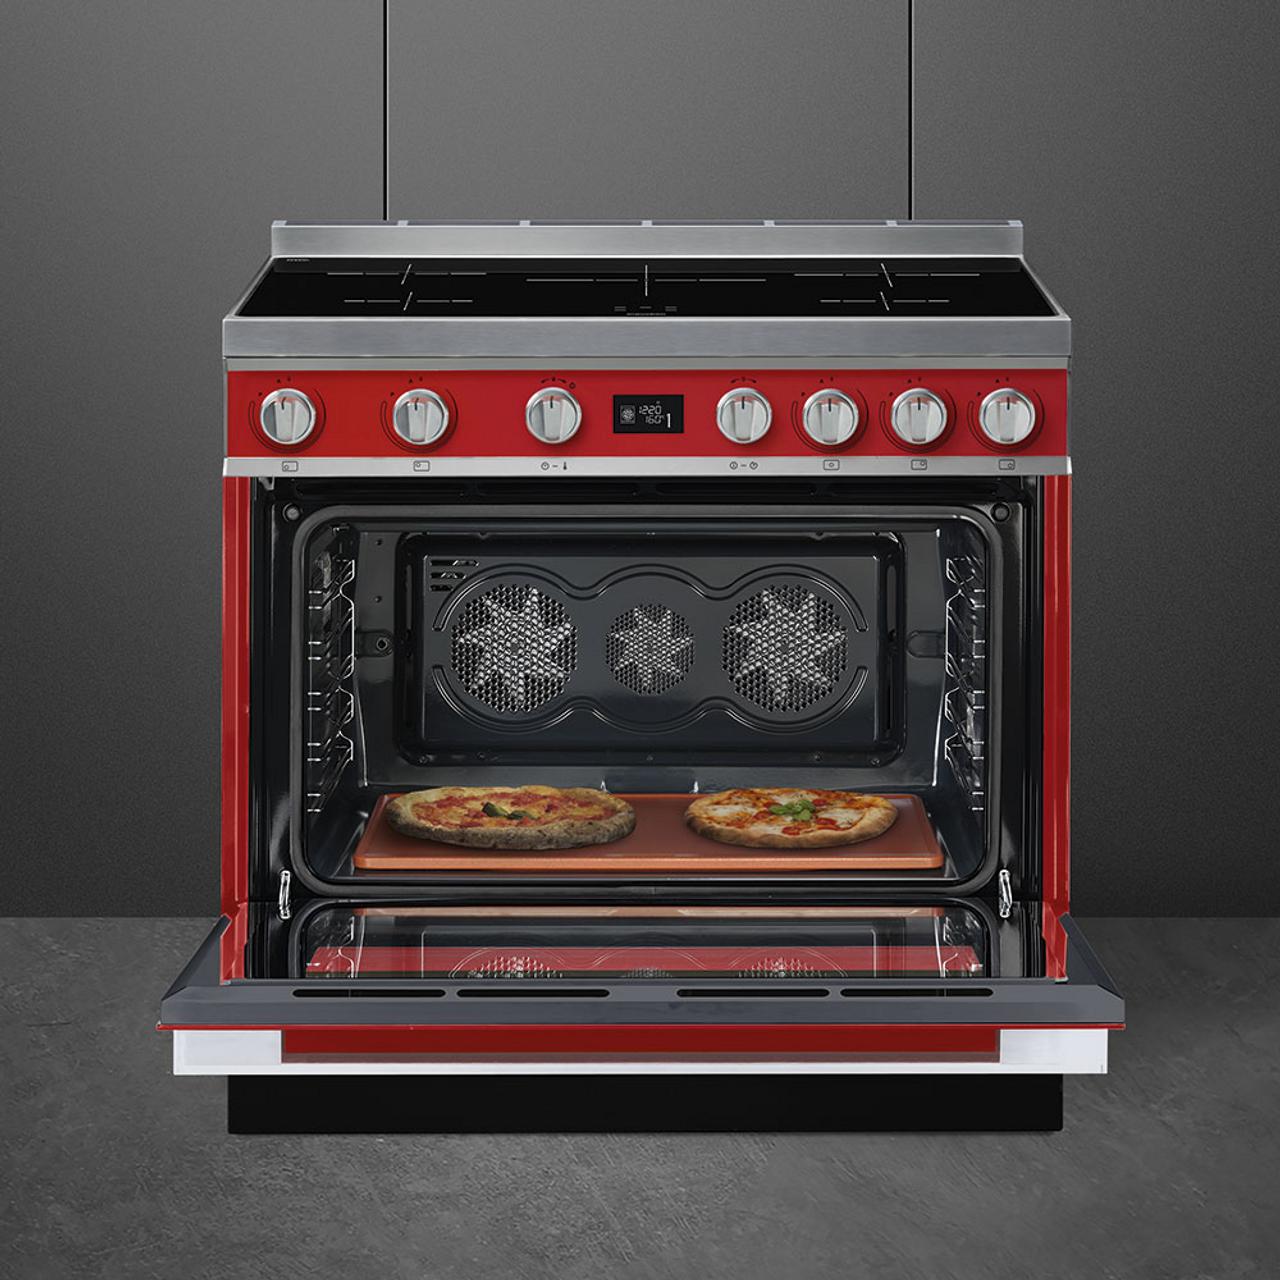 CPF9IPR - 90cm Portofino Freestanding Cooker, 5 Zone Induction, Pyrolytic Cleaning - Red